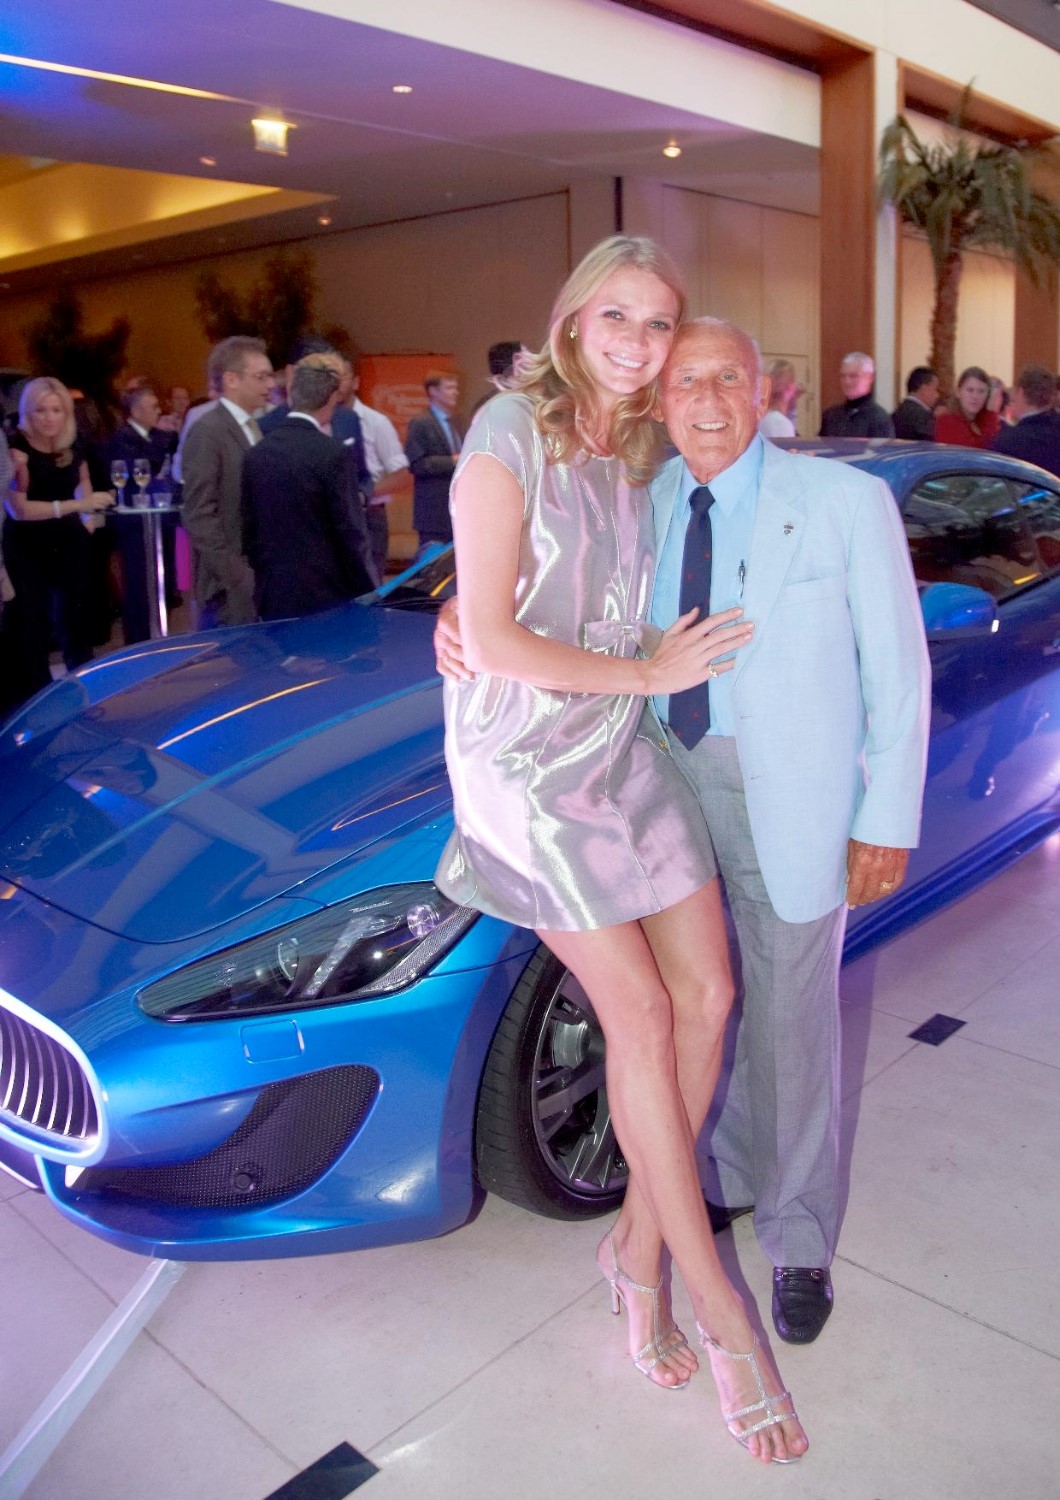 Stirling Moss with a tall girl.